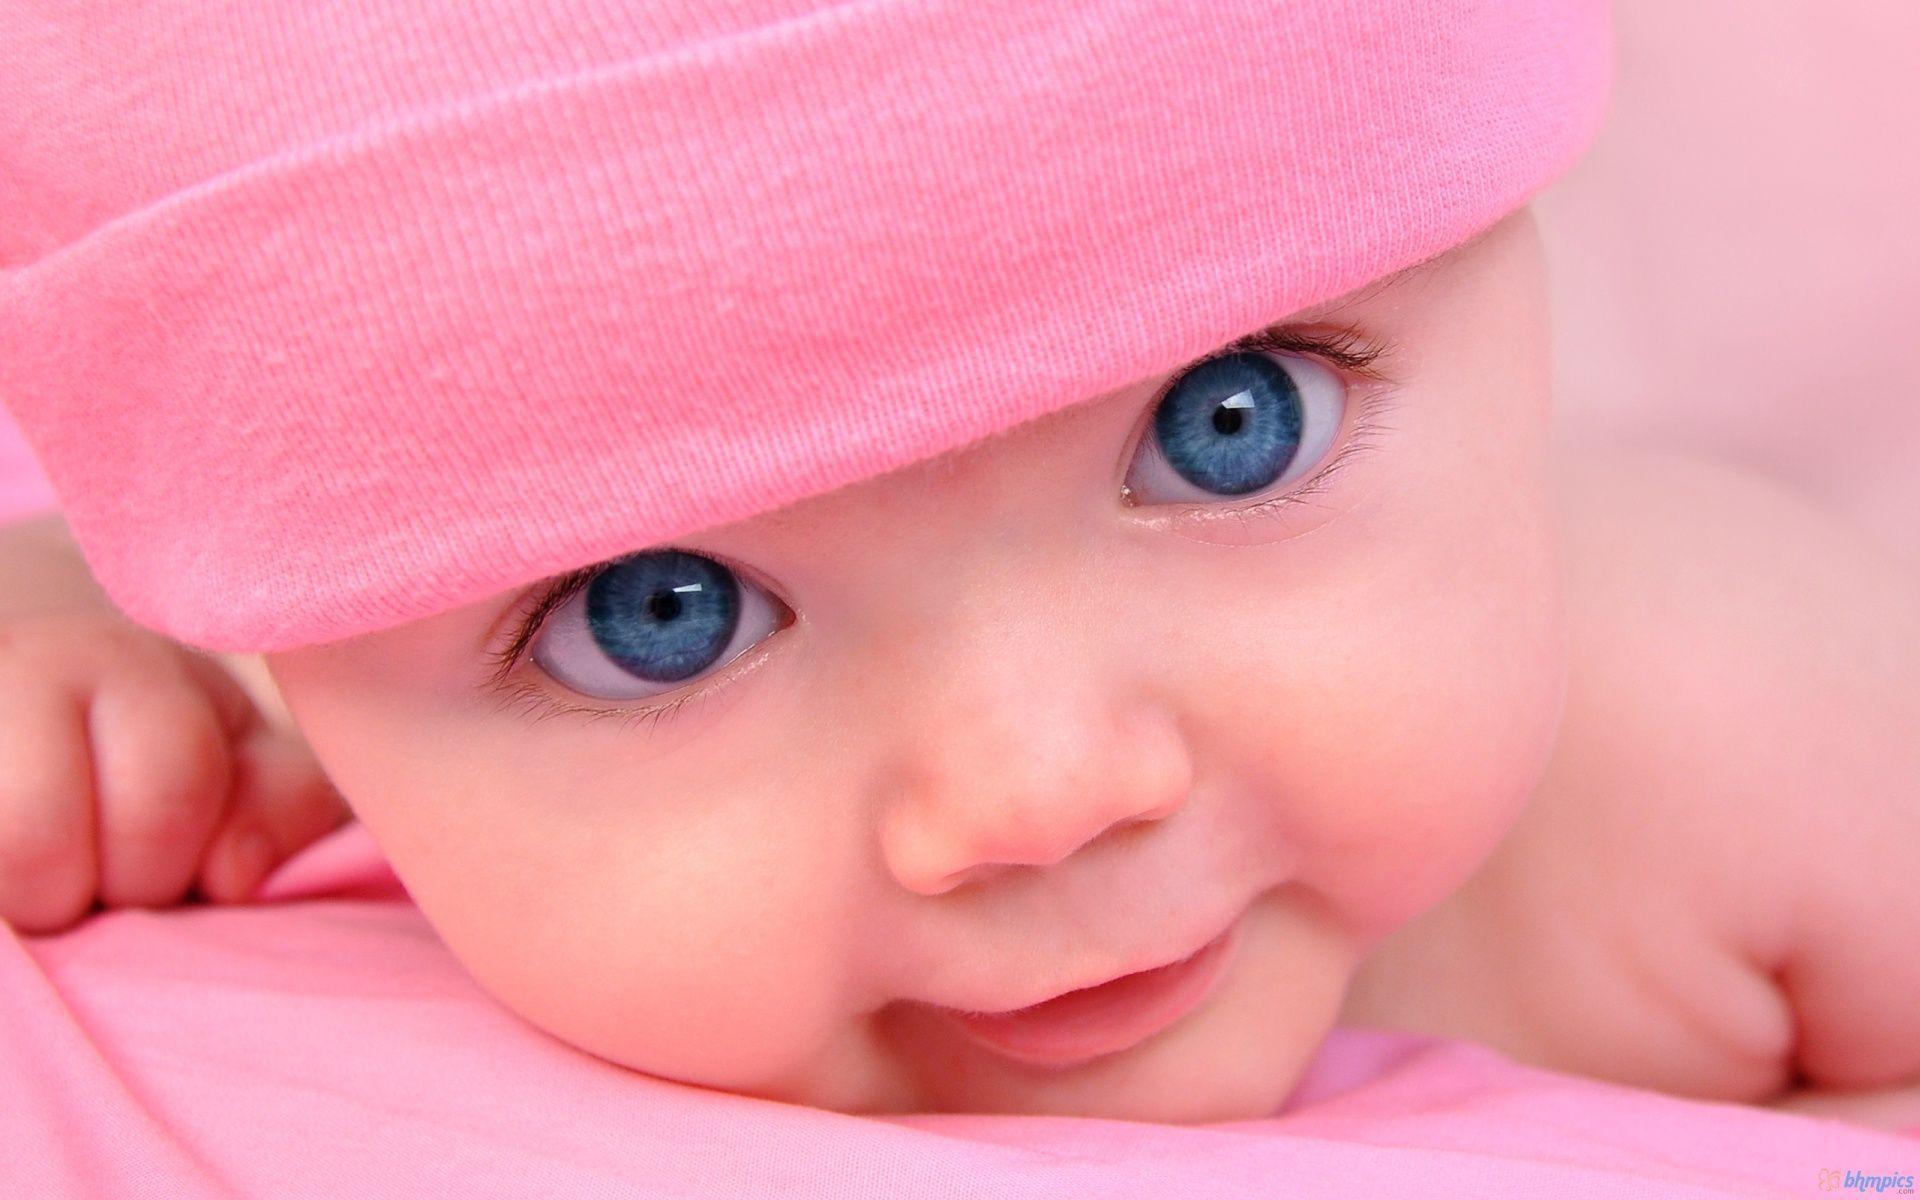 Wallpaper For > Wallpaper Background Cute Baby